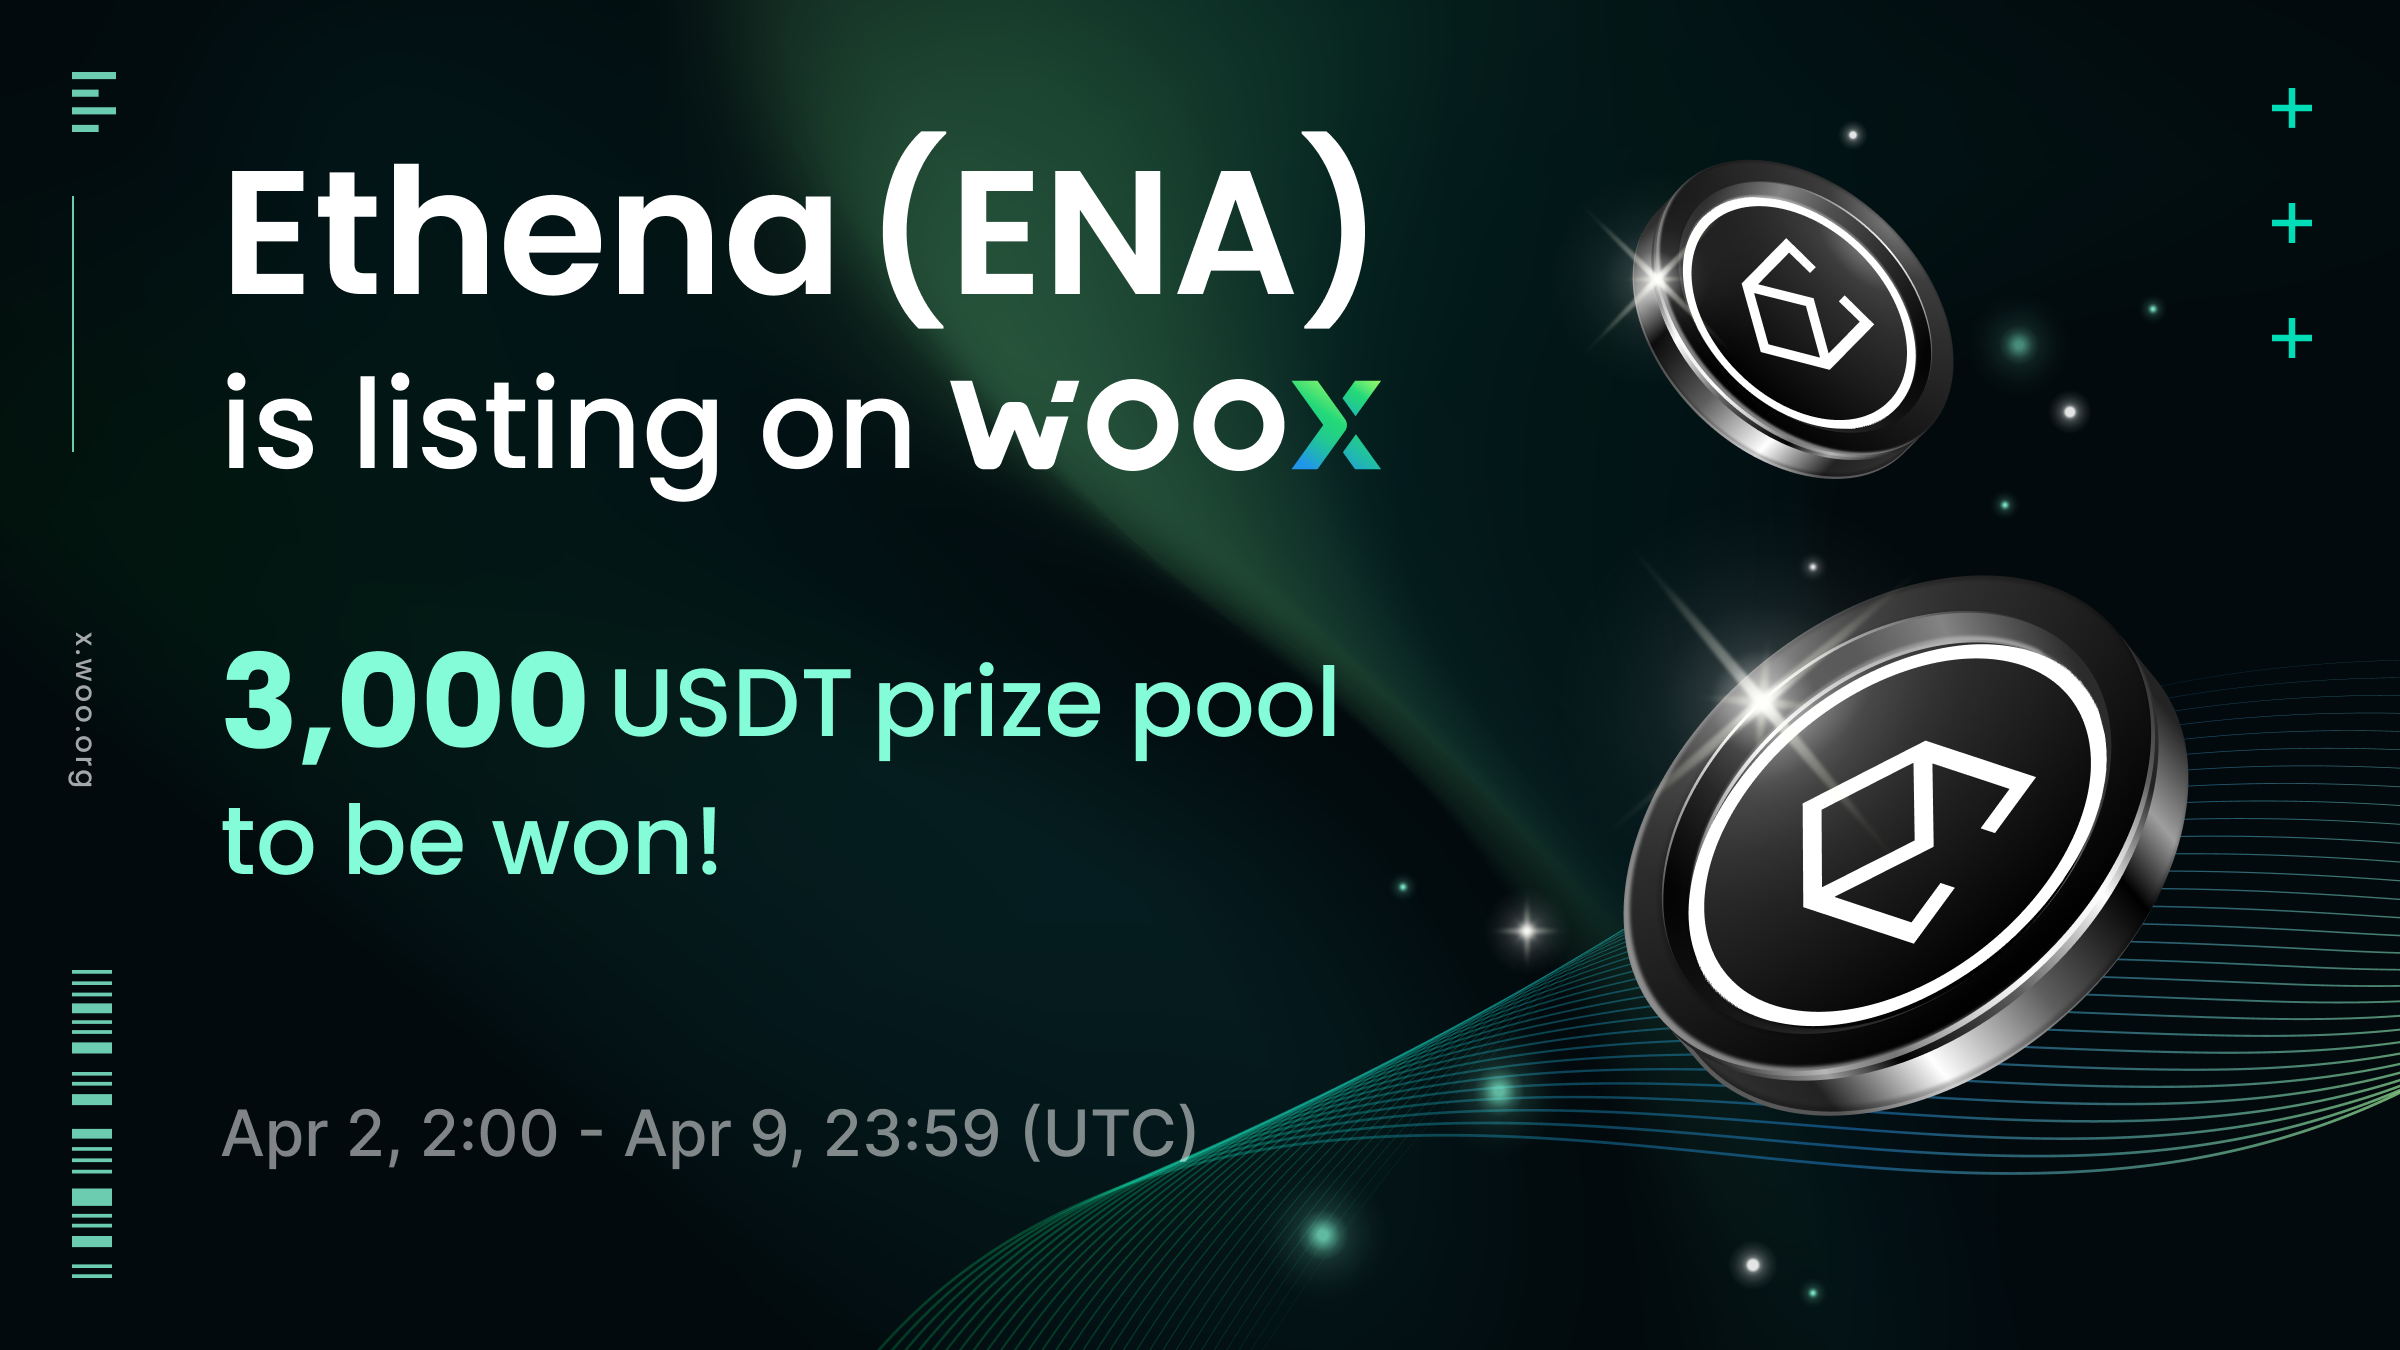 New Listing: Ethena (ENA) on WOO X - Trade and share a 3,000 USDT prize pool!